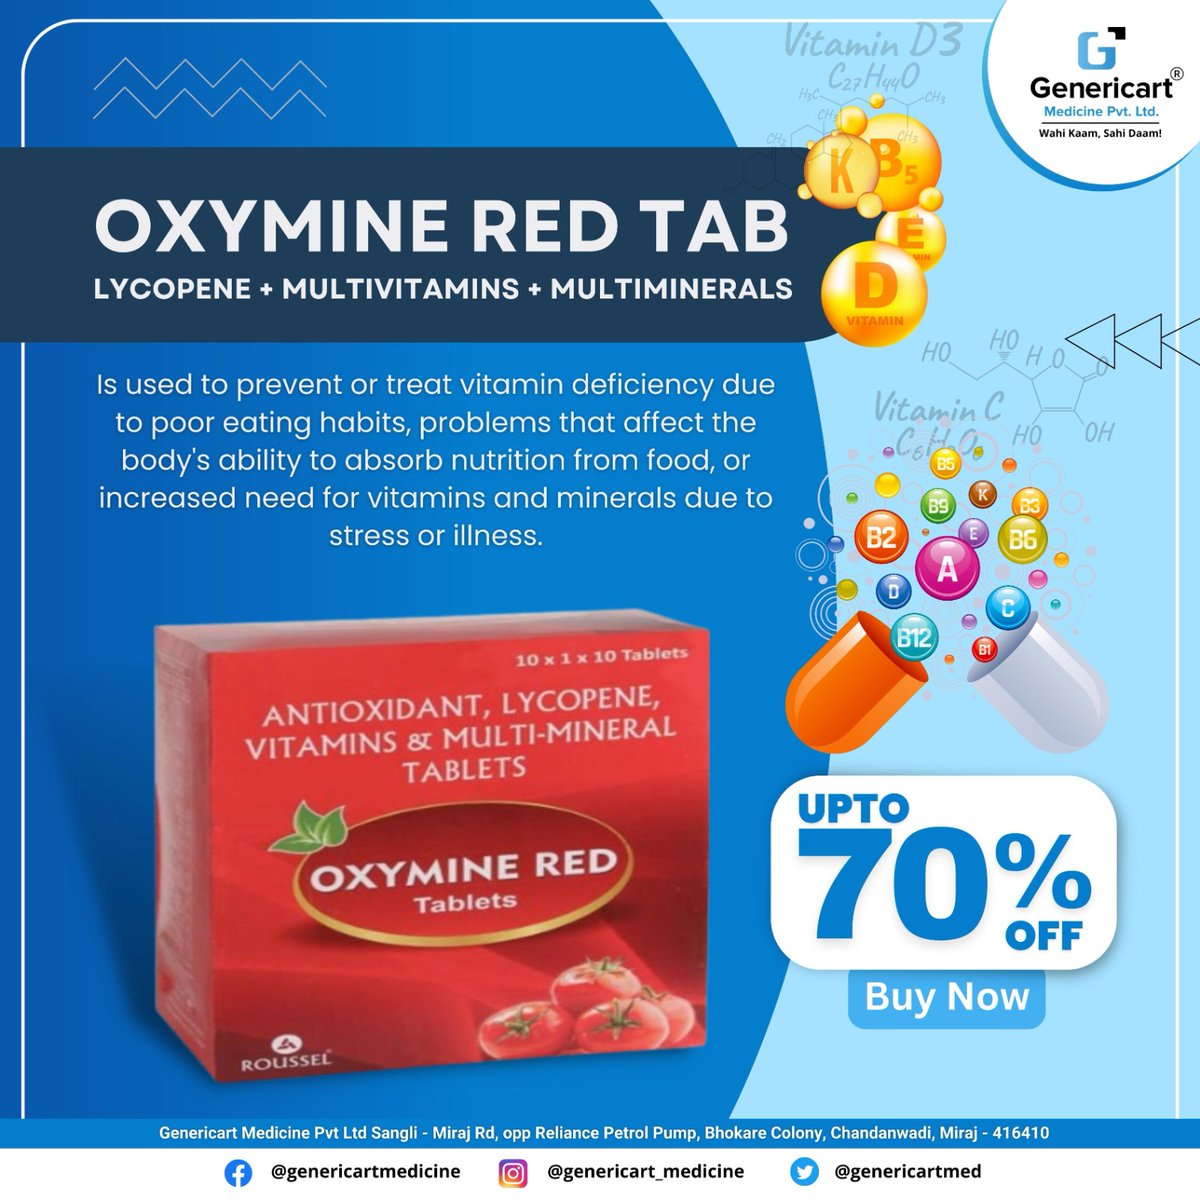 💊 OXYMINE RED TAB LYCOPENE + MULTIVITAMINS + MULTIMINERALS

🛒 Buy Now and save Upto 70% 💸
.
.
.
.
.
.
.
#genericart #medicine #generic #oxymine #tablet #treatment #vitamins #deficiency #qualitymedicine #affordablemedicine #savemoney #discounts #70percentoff #buynow #algorithm